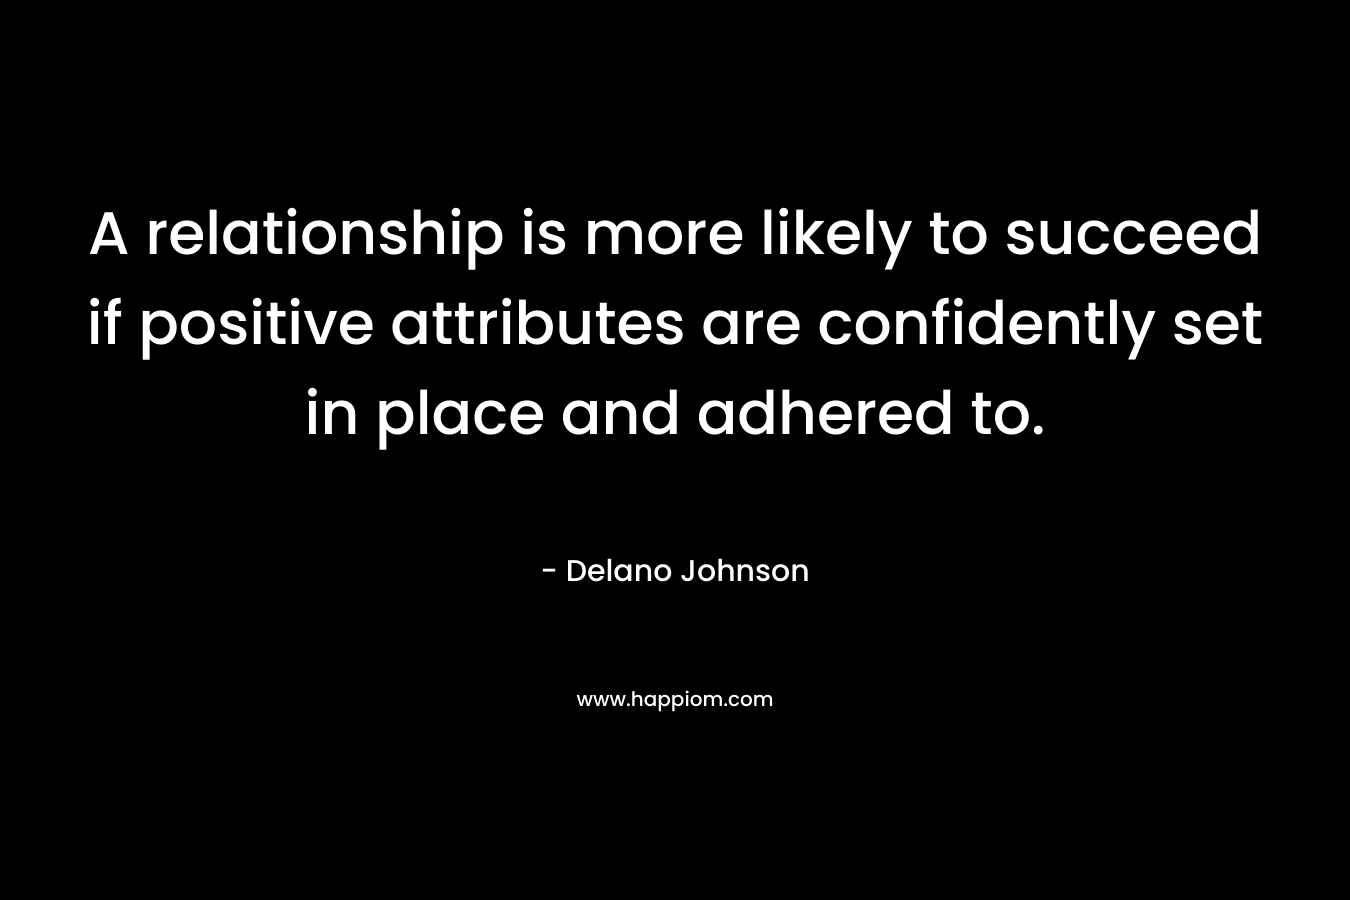 A relationship is more likely to succeed if positive attributes are confidently set in place and adhered to. – Delano Johnson